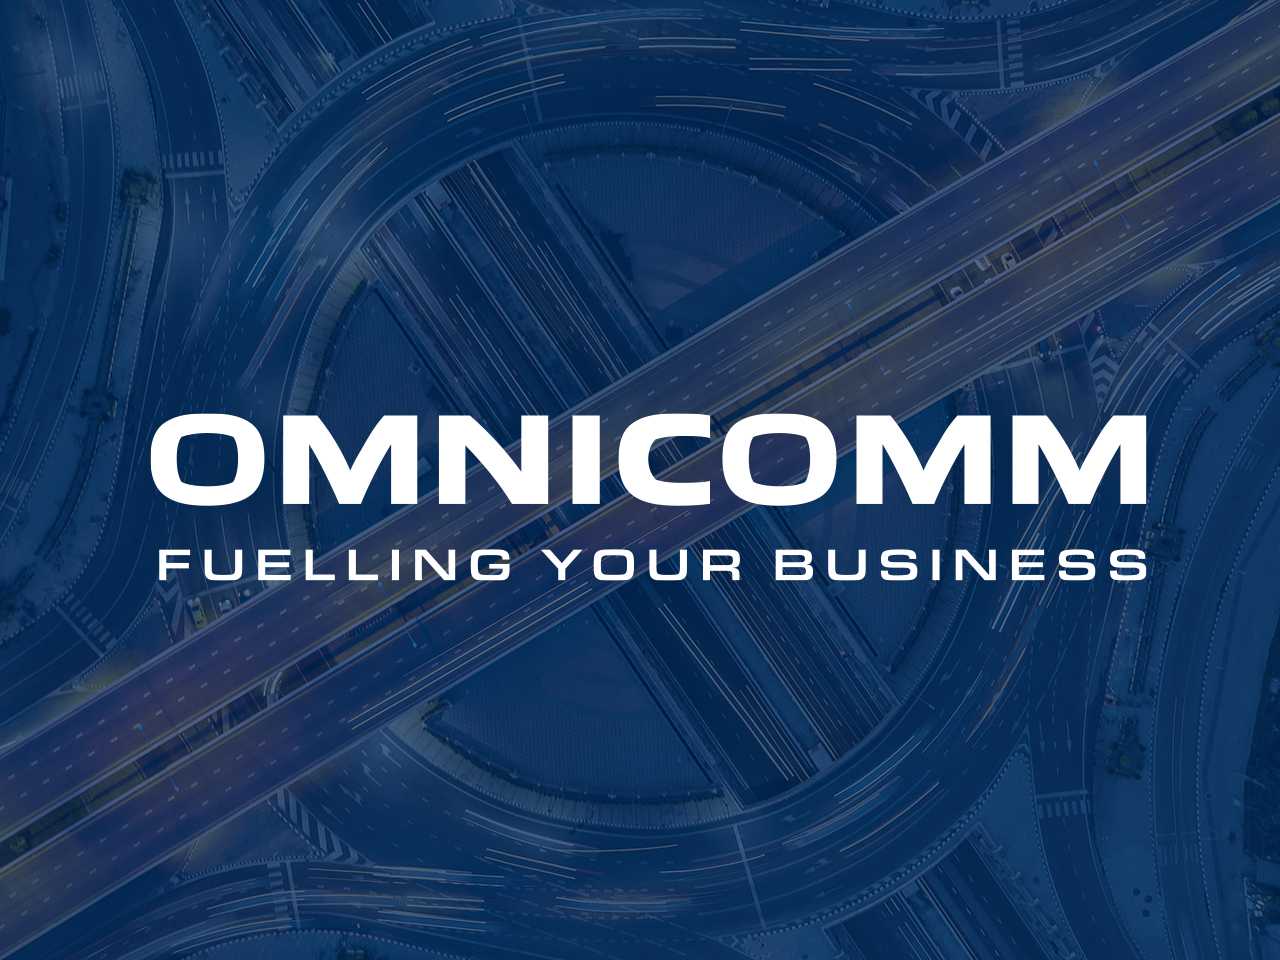 Omnicomm is strongly committed to supporting its channel partners